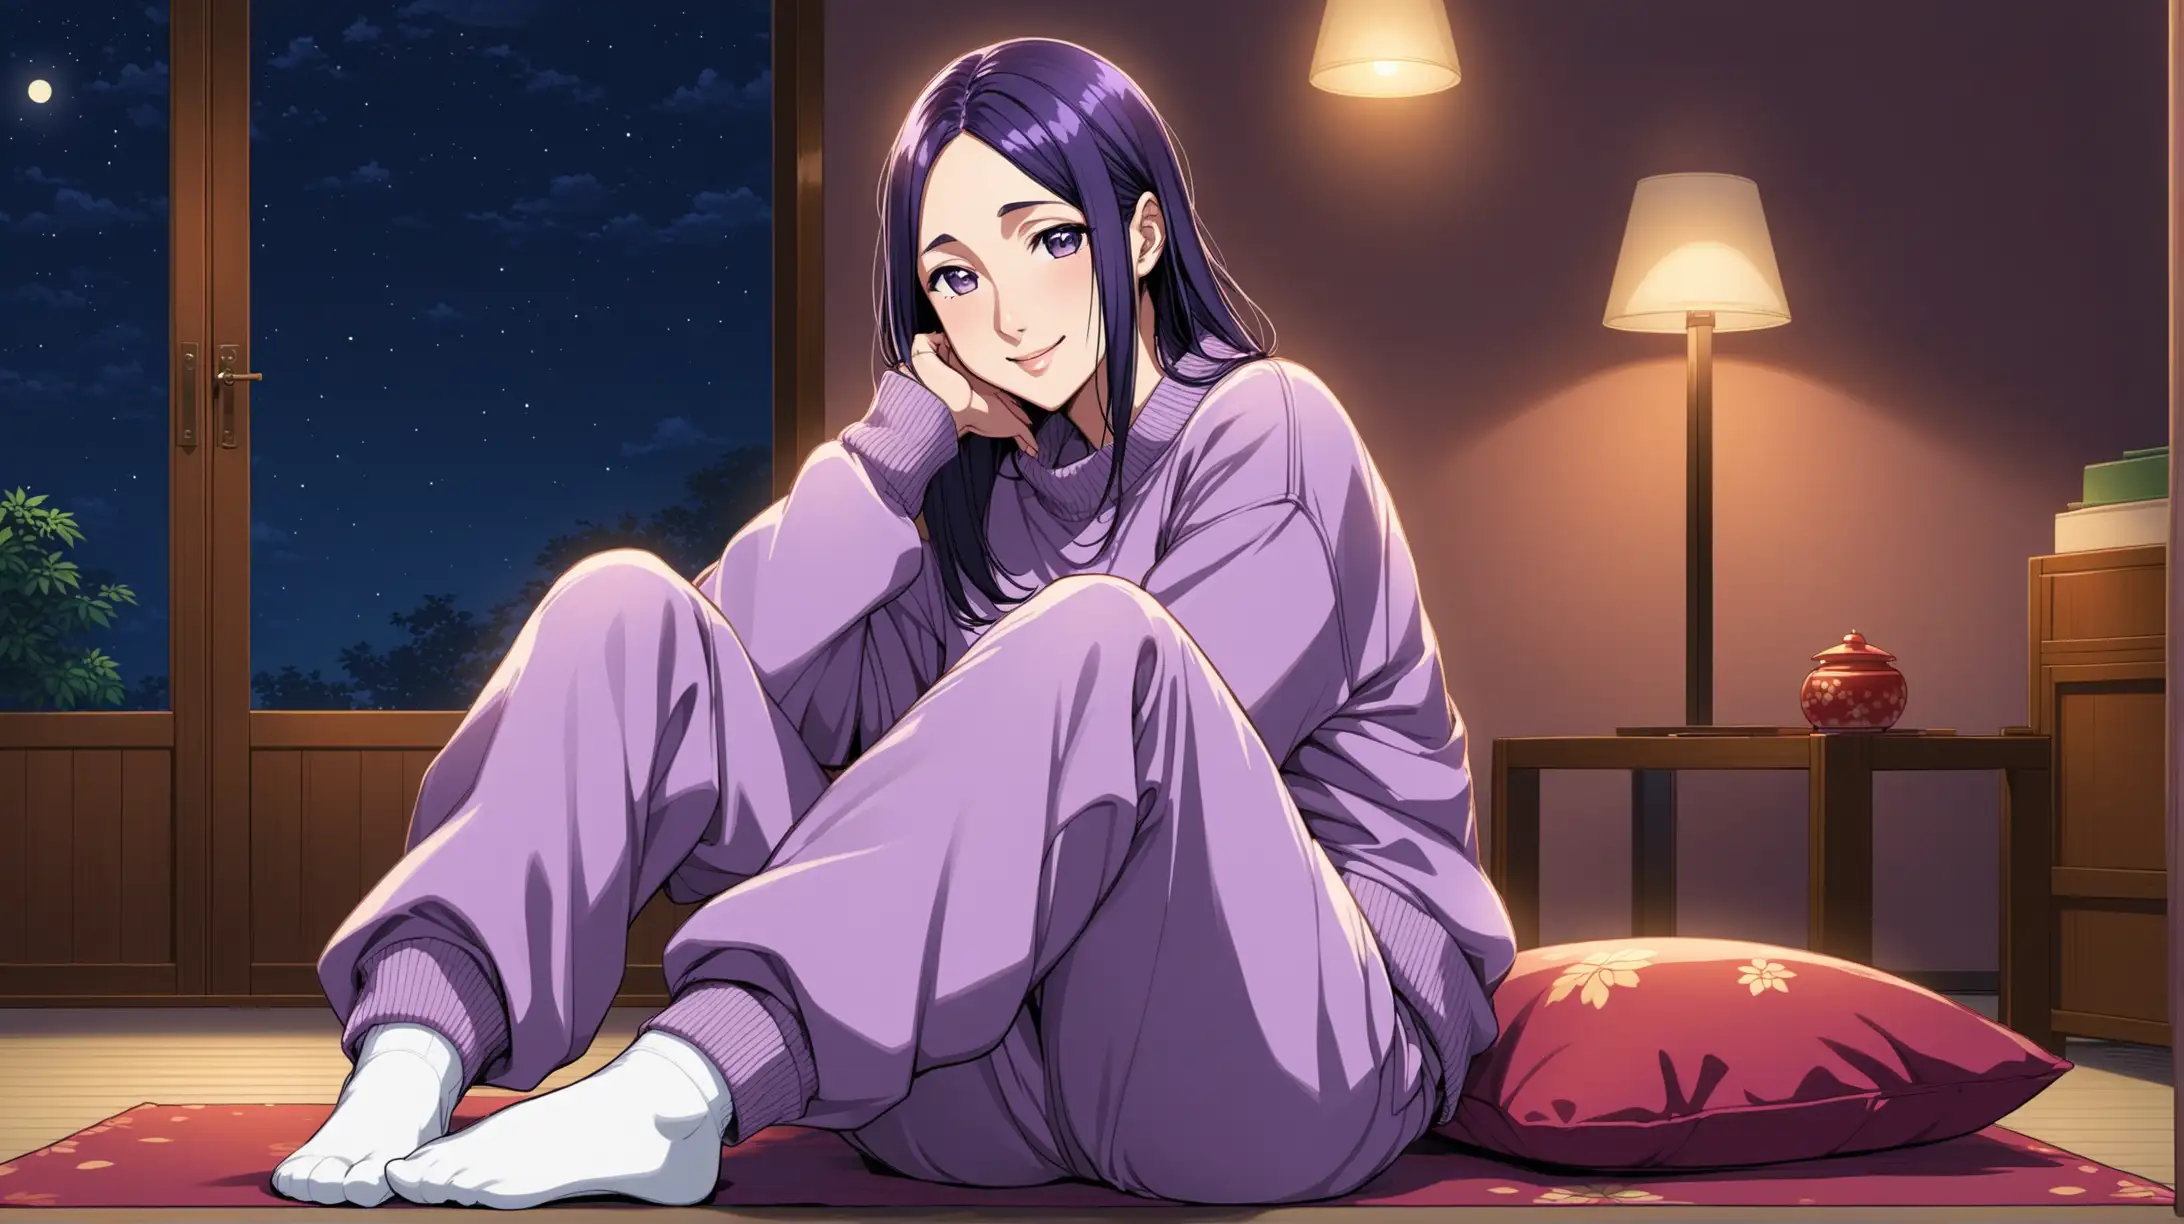 Draw the character Minamoto no Raikou sitting indoors alone at night while she is wearing pants with white socks and a sweater and smiling at the viewer